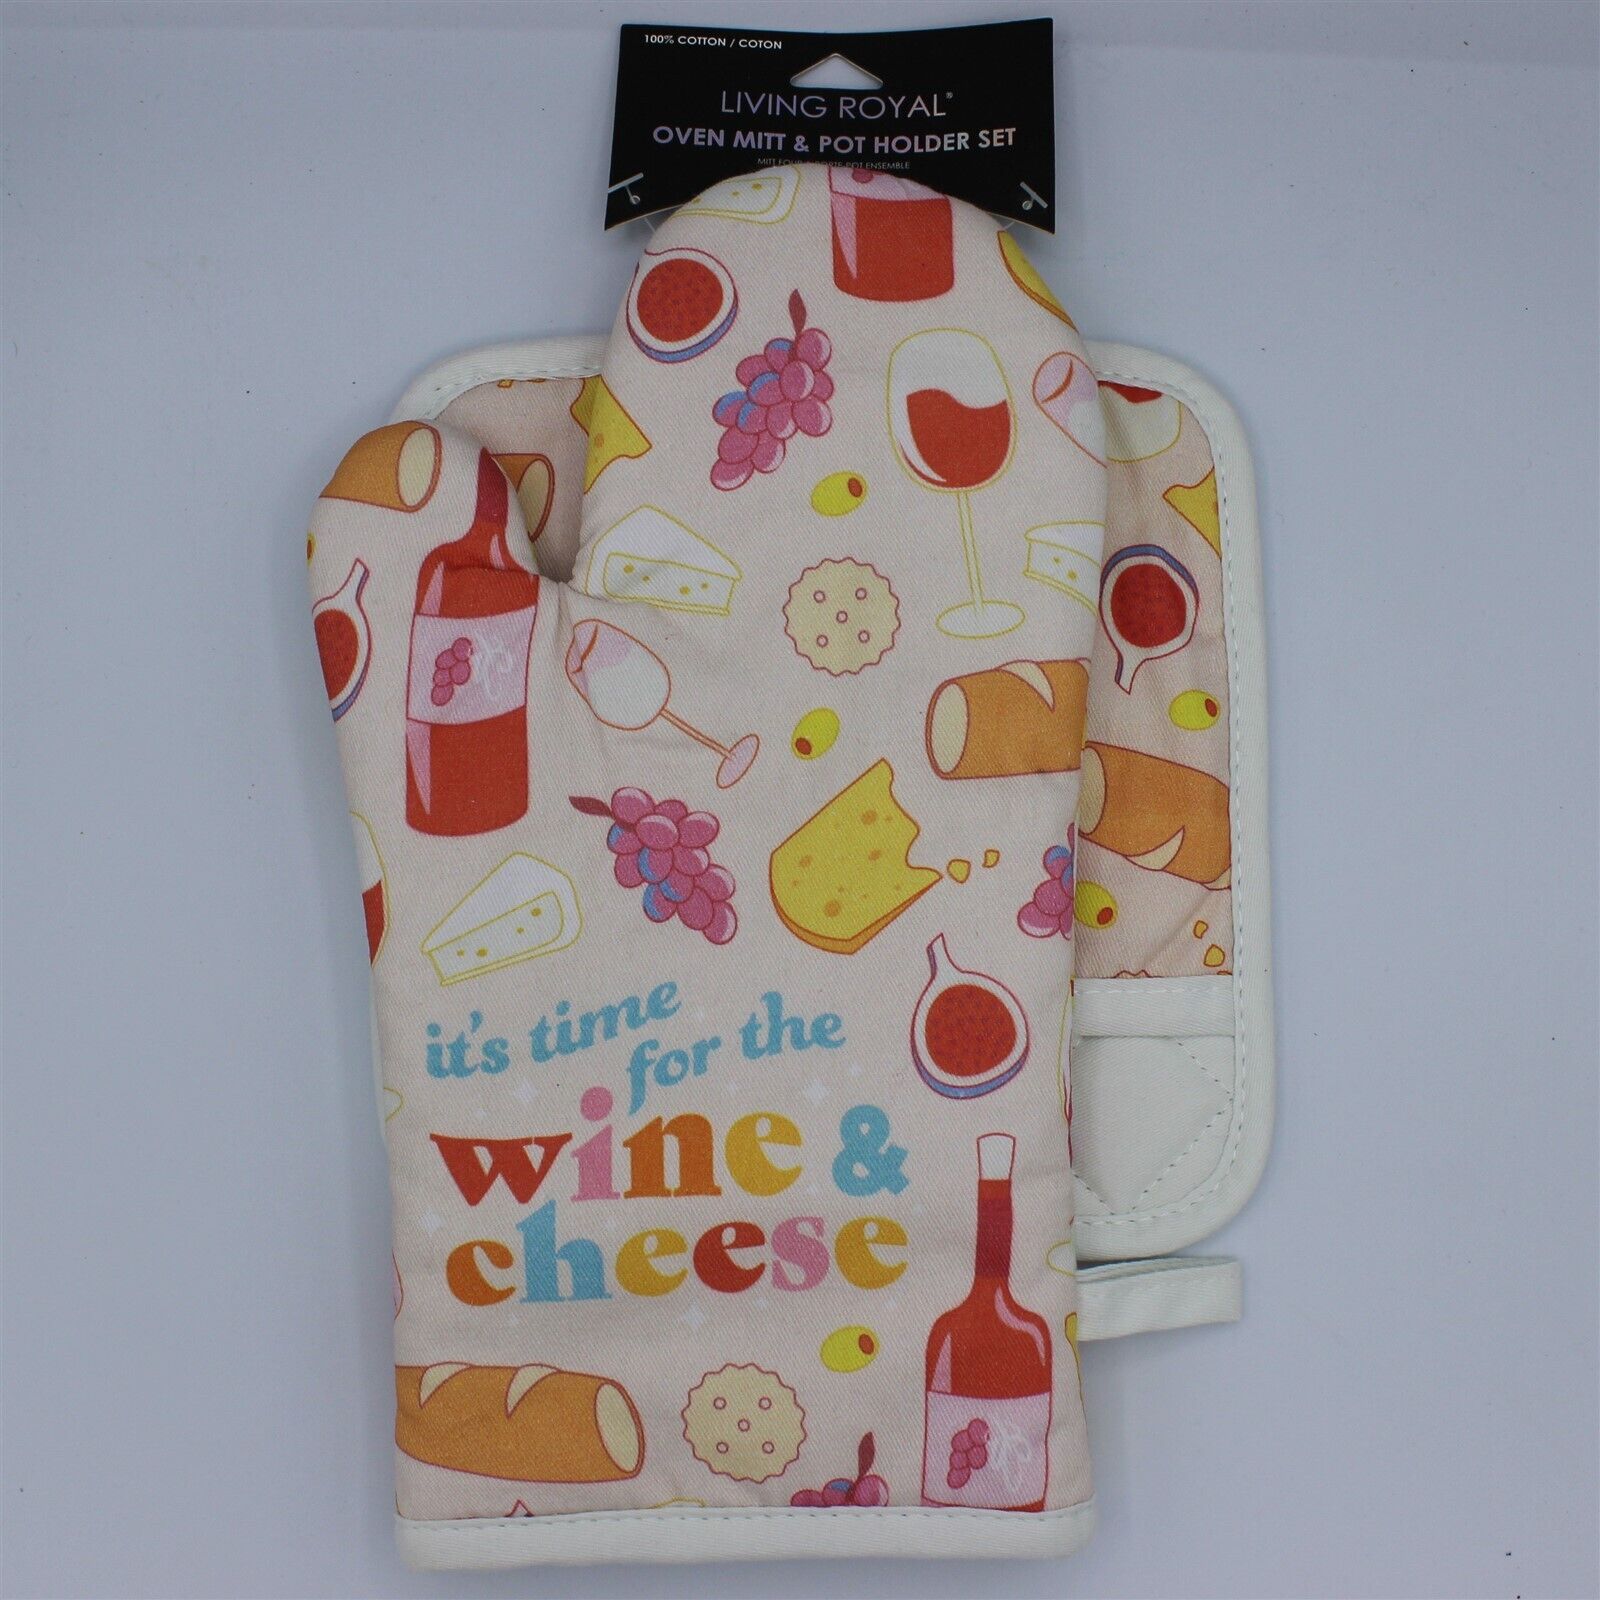 Living Royal - It's Time For The Wine & Cheese - Oven Mitt & Pot Holder Set